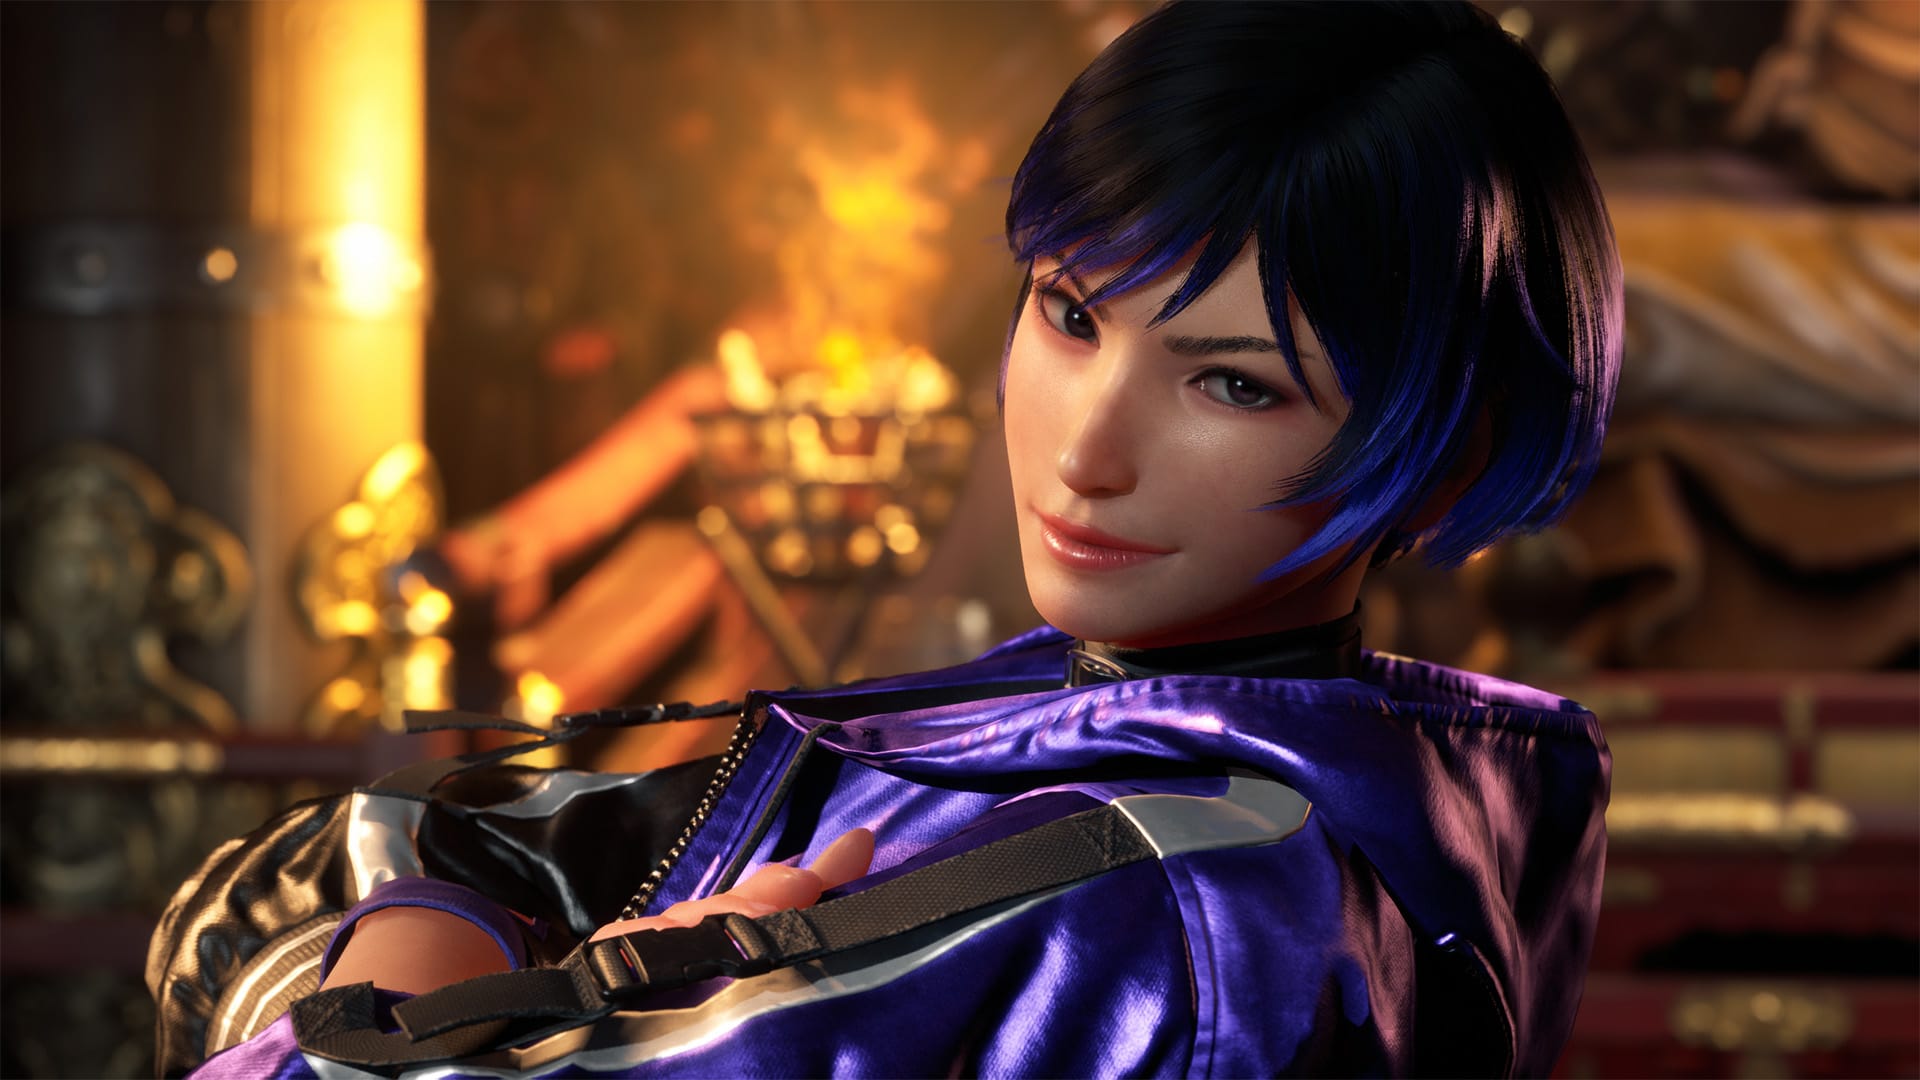 Tekken 8 Interview – Discussing Story, Gameplay, and Approaching New Players